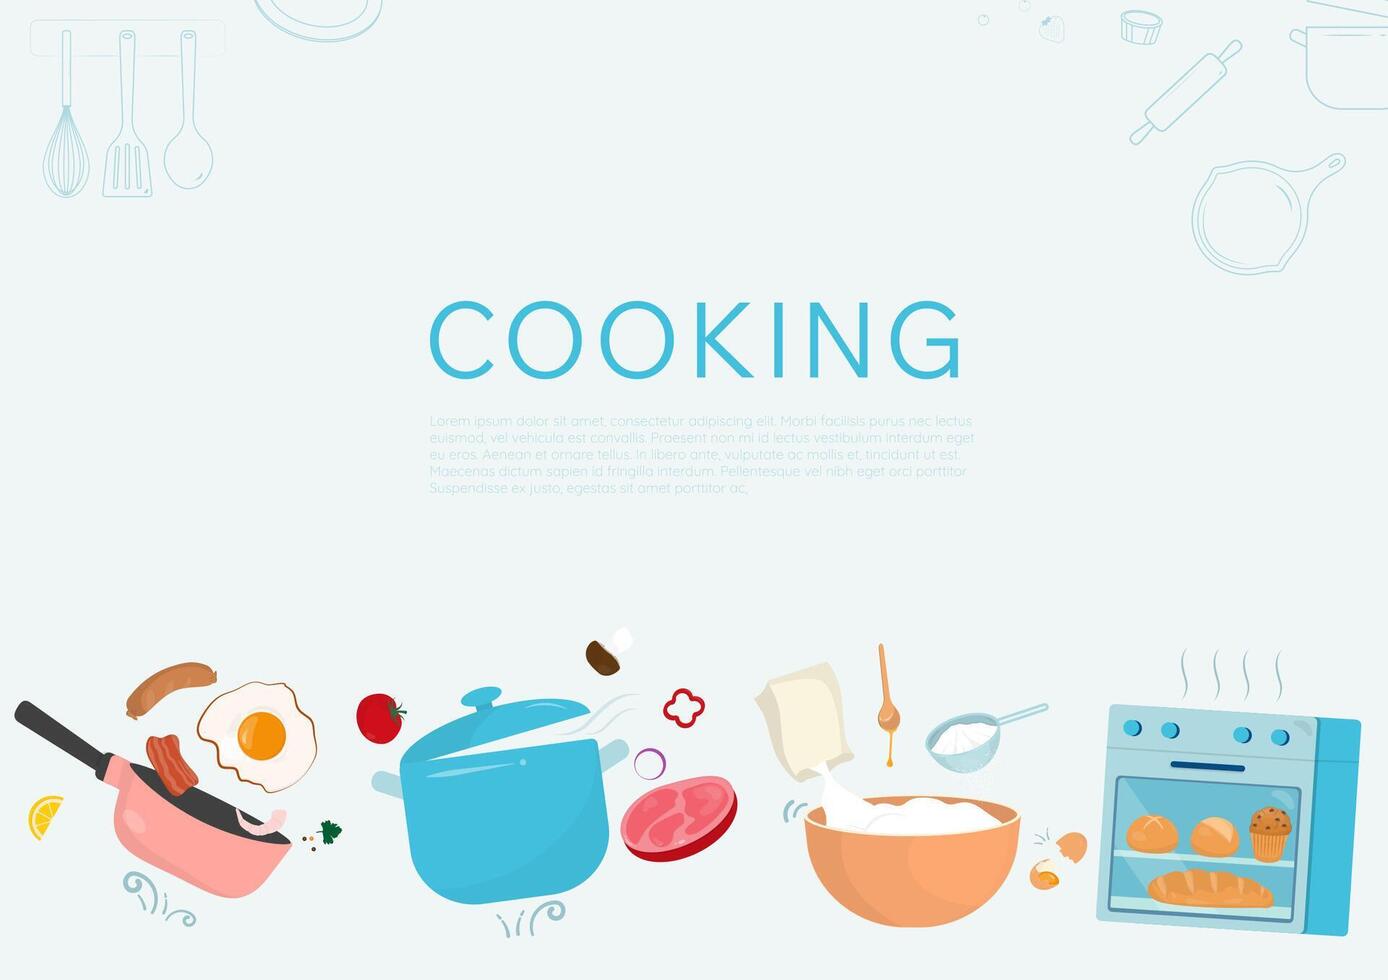 Cooking and baking background concept vector